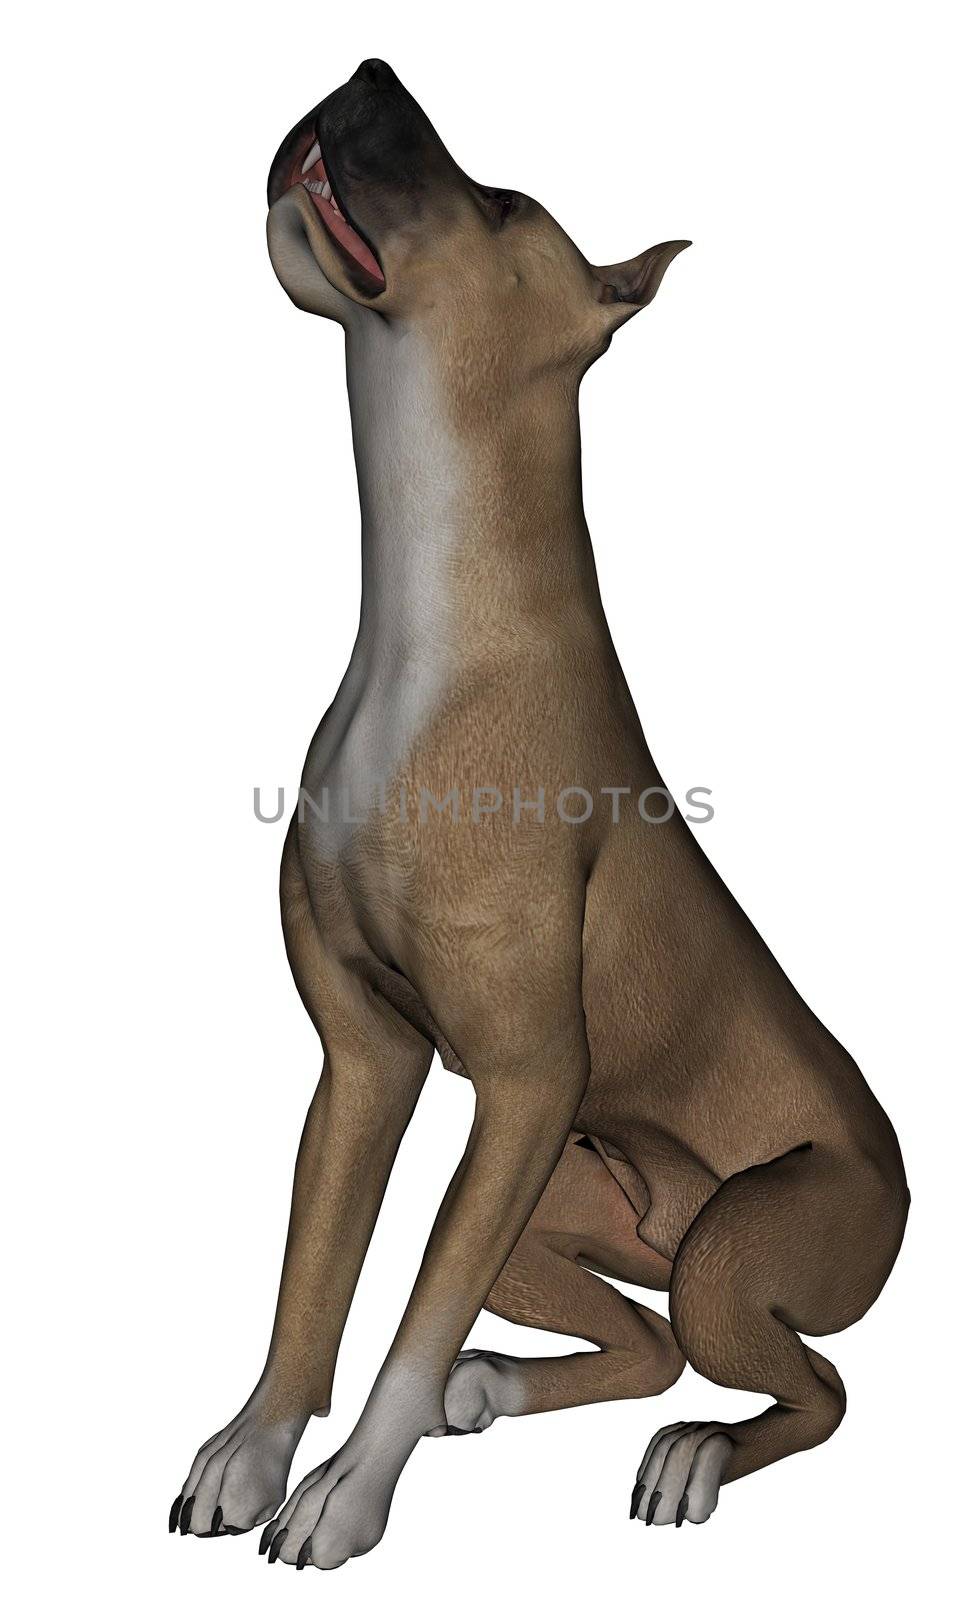 3D rendered great dane dog on white background isolated